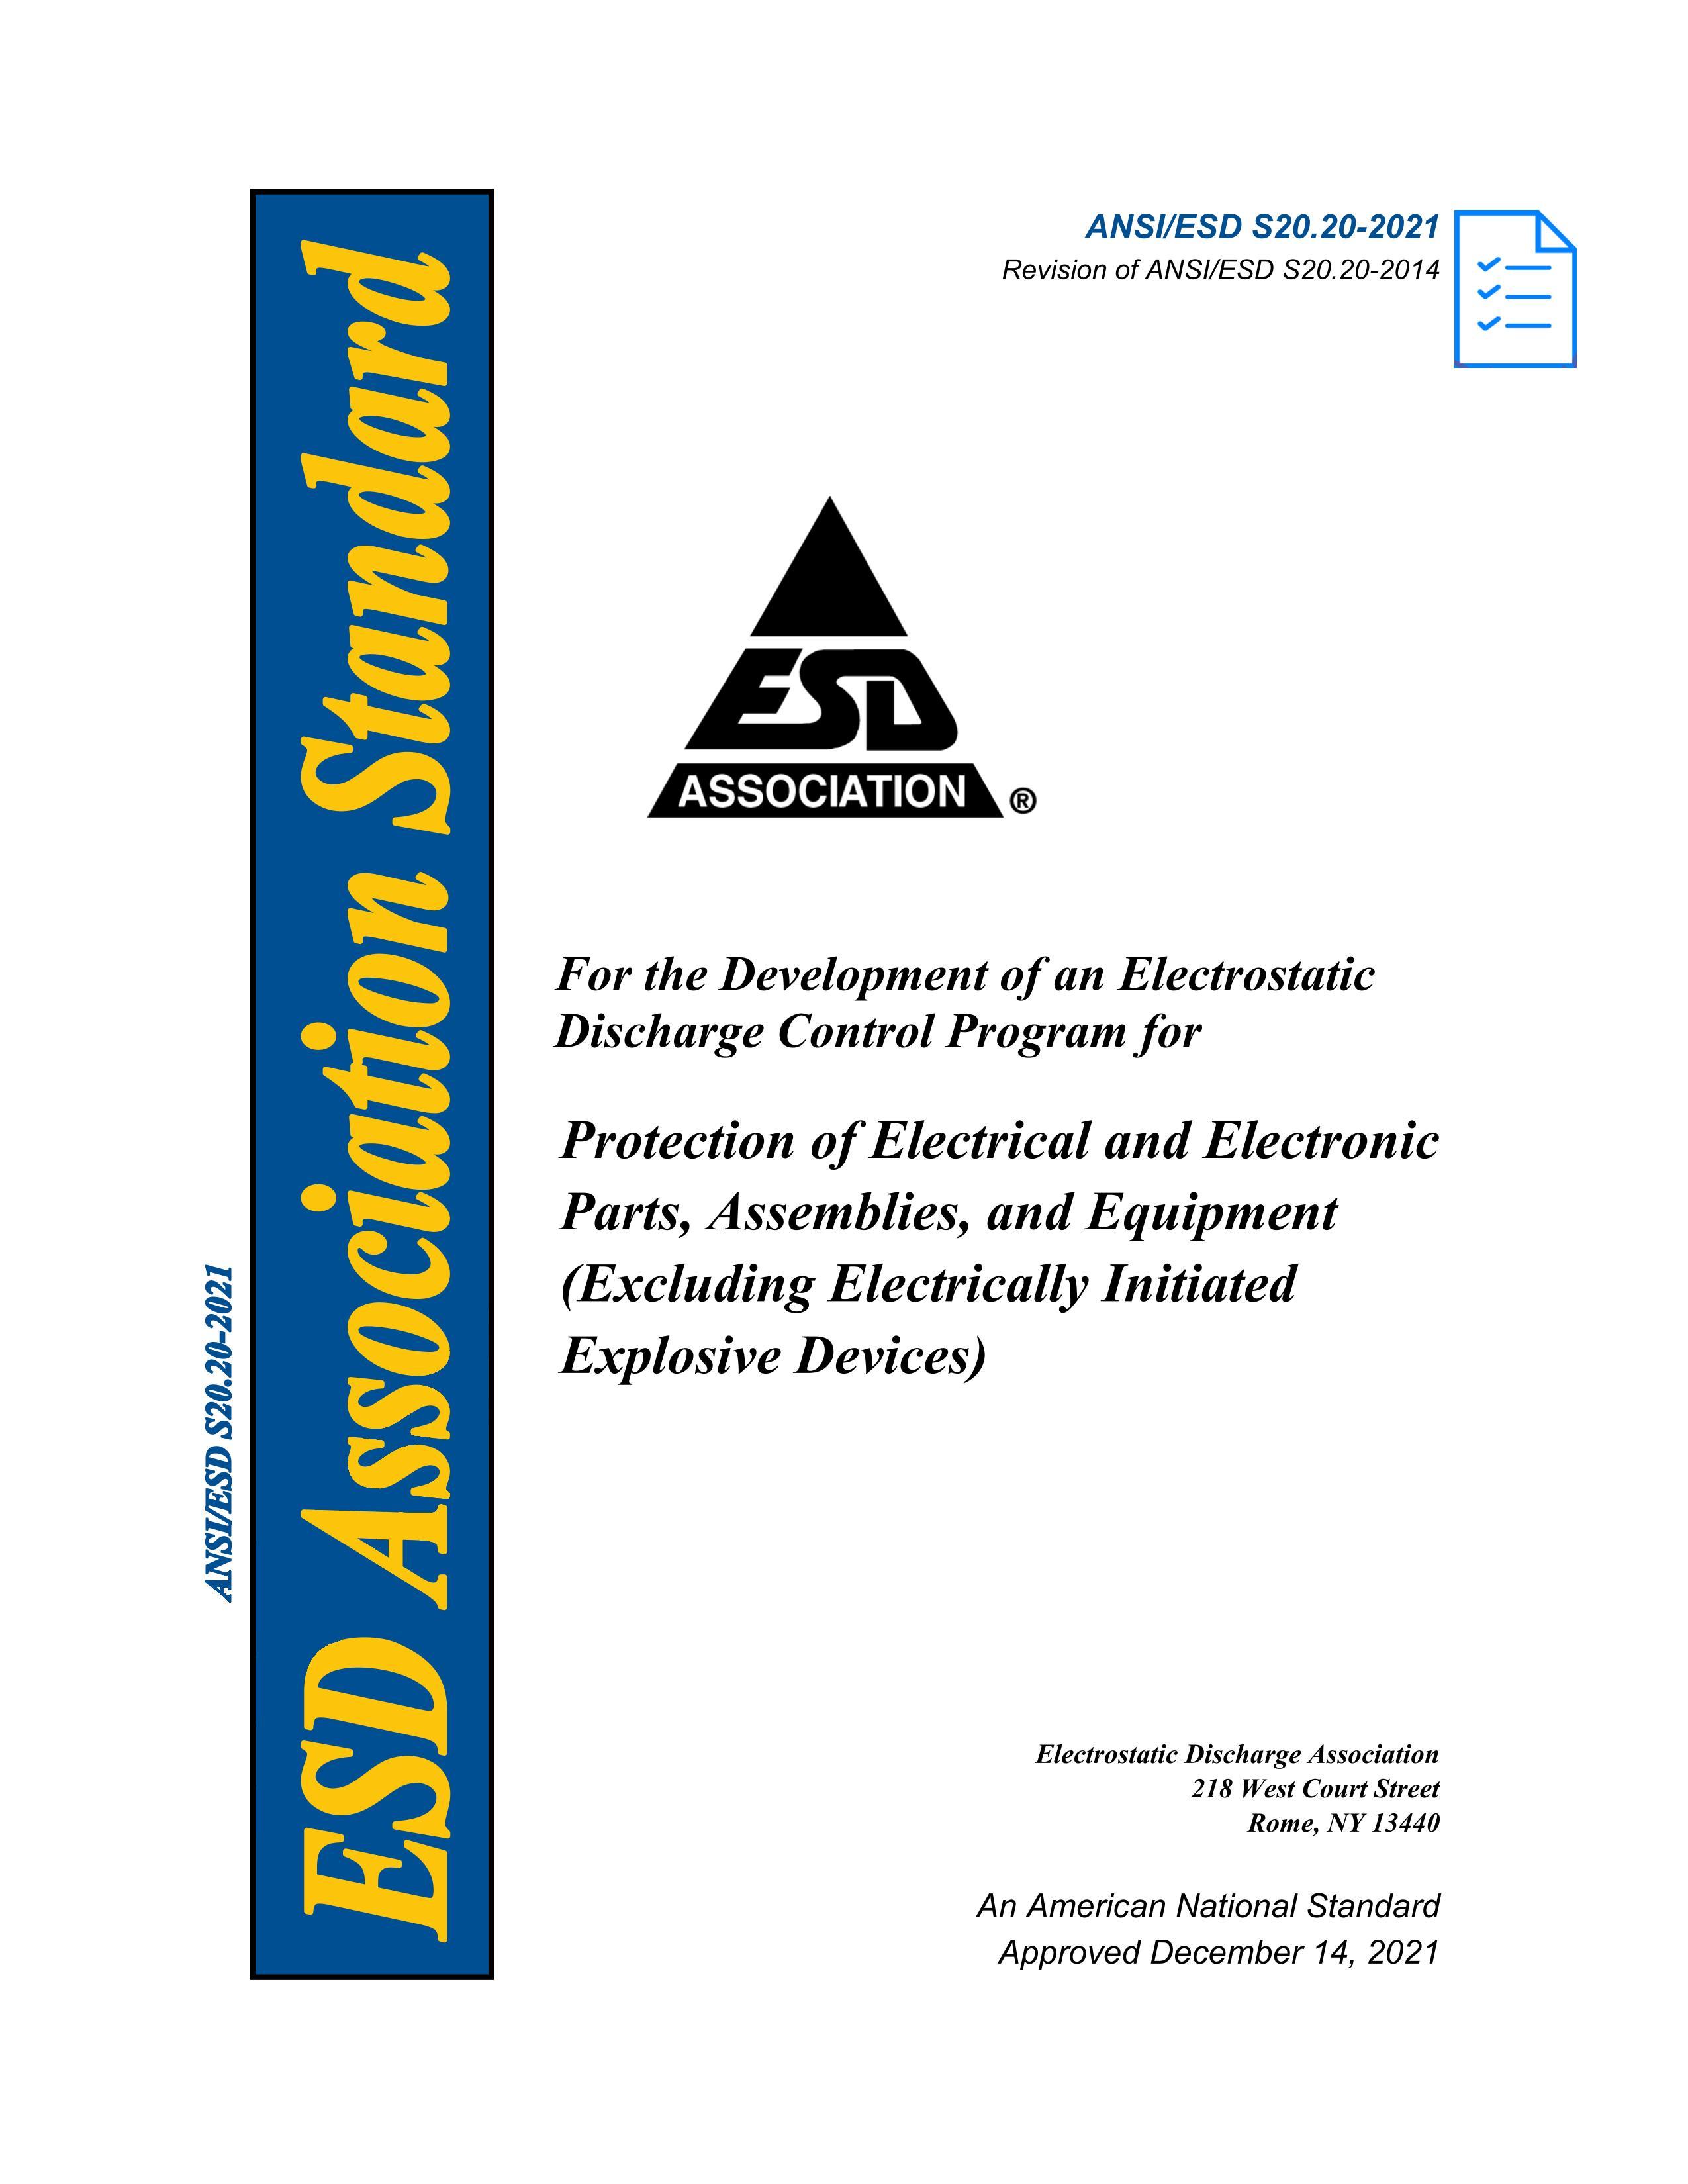 ANSI-ESD-S20.20-2021 Protection of Electrical and Electronic Parts, Assemblies and Equipment (Excluding Electrically Initiated Explosive Devices).pdf1ҳ